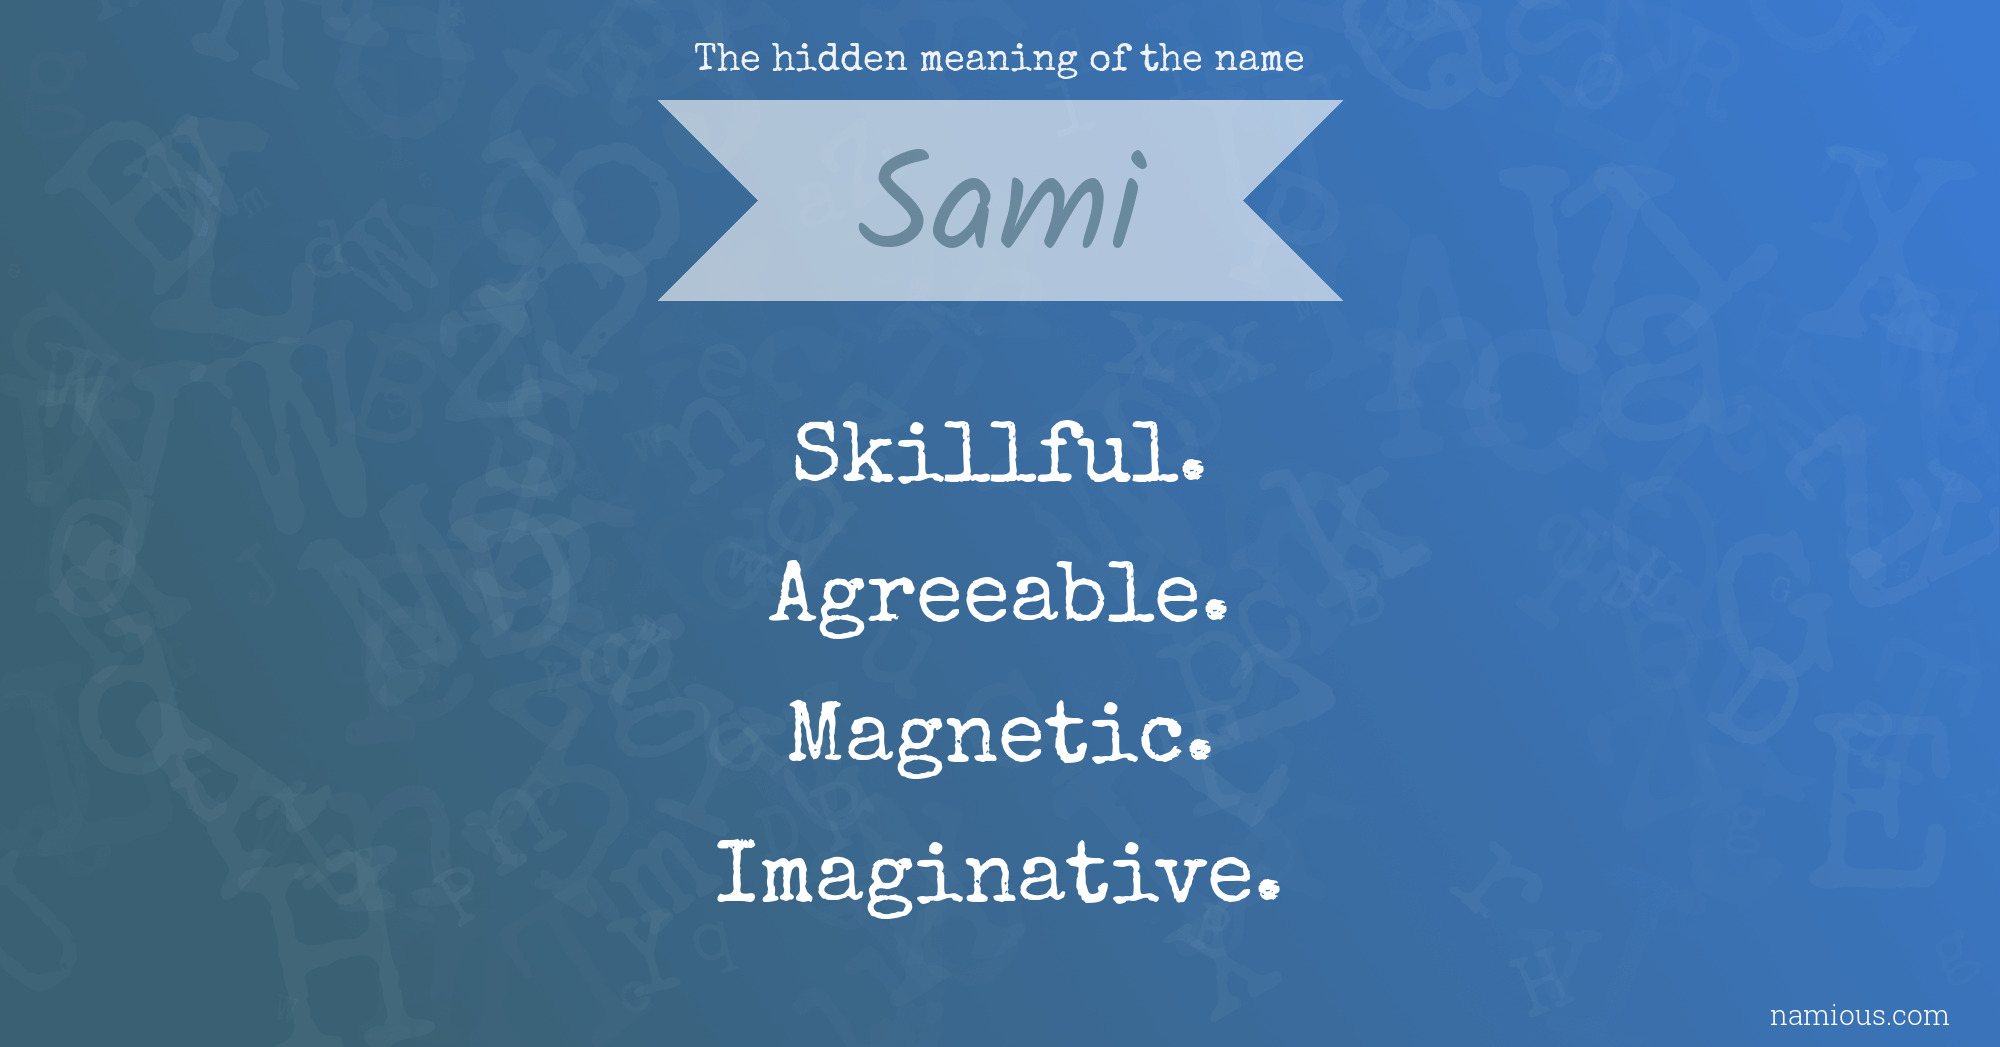 The hidden meaning of the name Sami